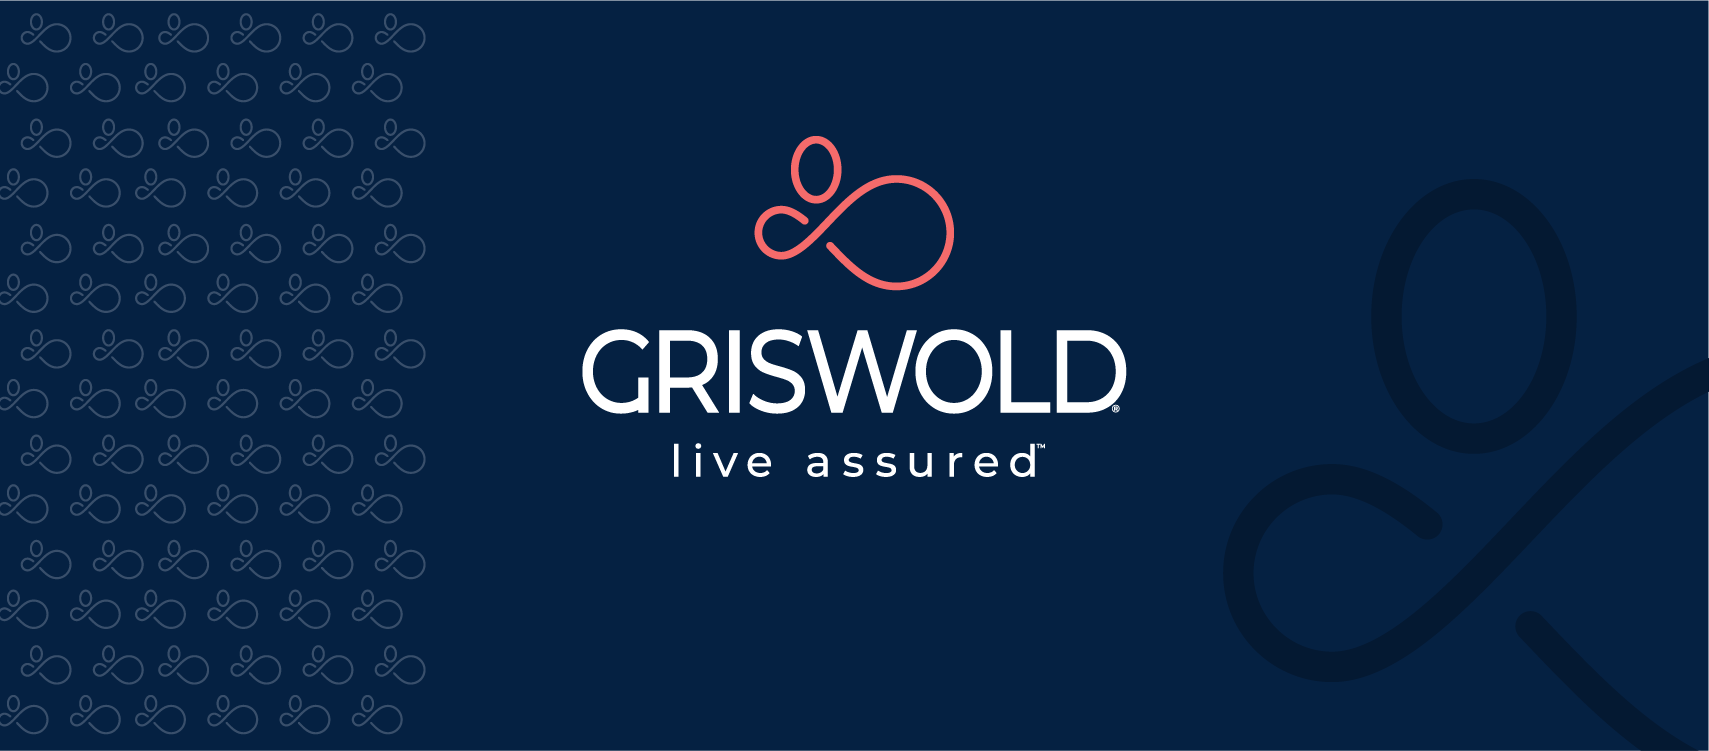 Griswold Care Pairing for Anderson, Laurens, Pickens & Oconee Counties 422 College Ave, Clemson South Carolina 29631